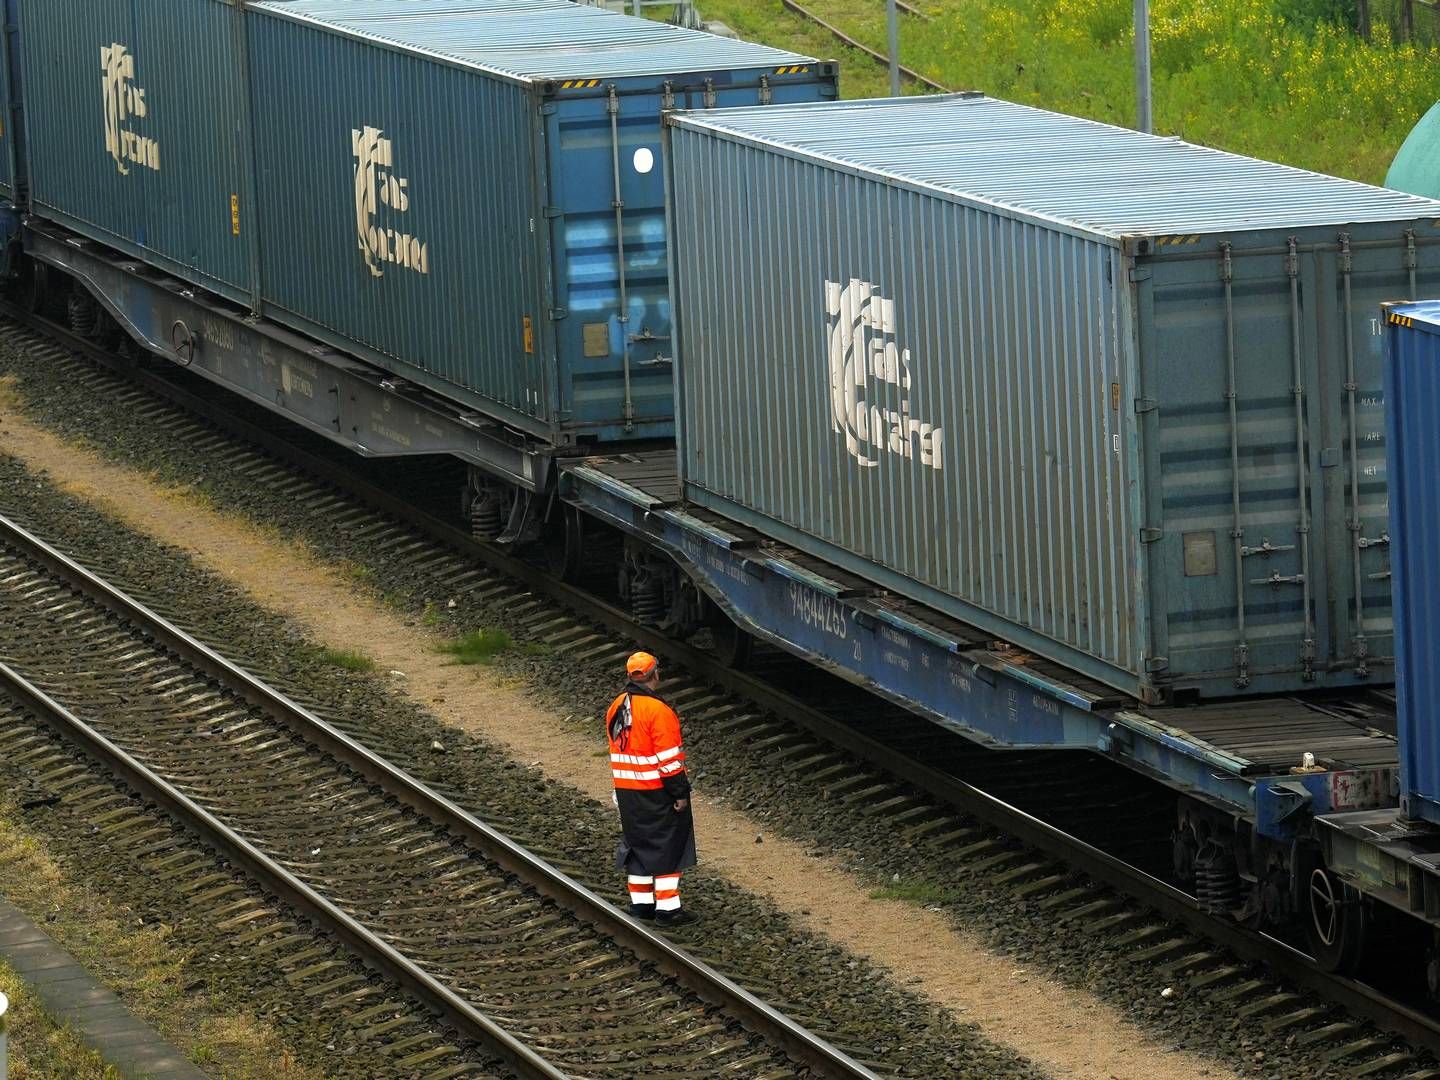 The freight route from China to Europe with transit in Russia became popular during the pandemic, which caused major delays for sea freight. After Russia's full-scale invasion of Ukraine in February 2022, most major Danish carriers decided to call it quits. | Photo: Ints Kalnins/Reuters/Ritzau Scanpix